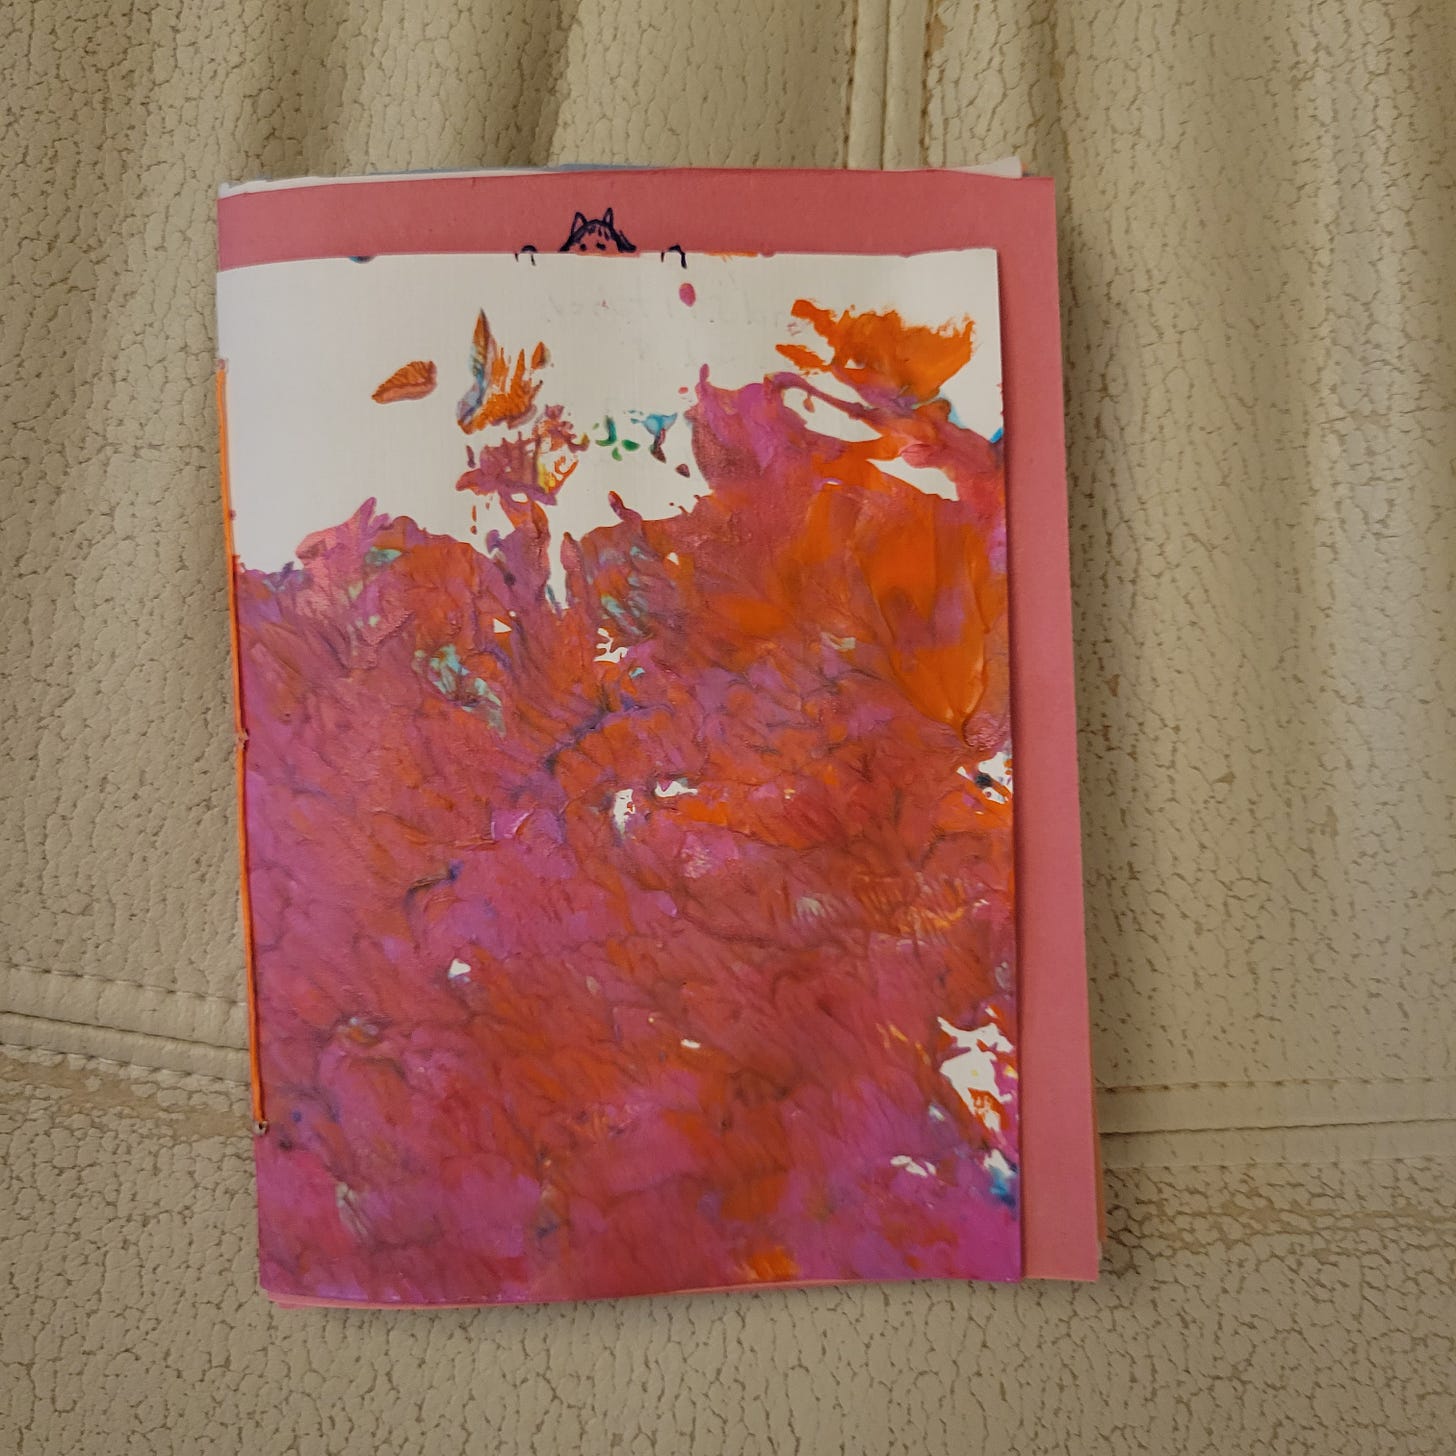 closed booklet with orange stitching and a hand painted cover in pink